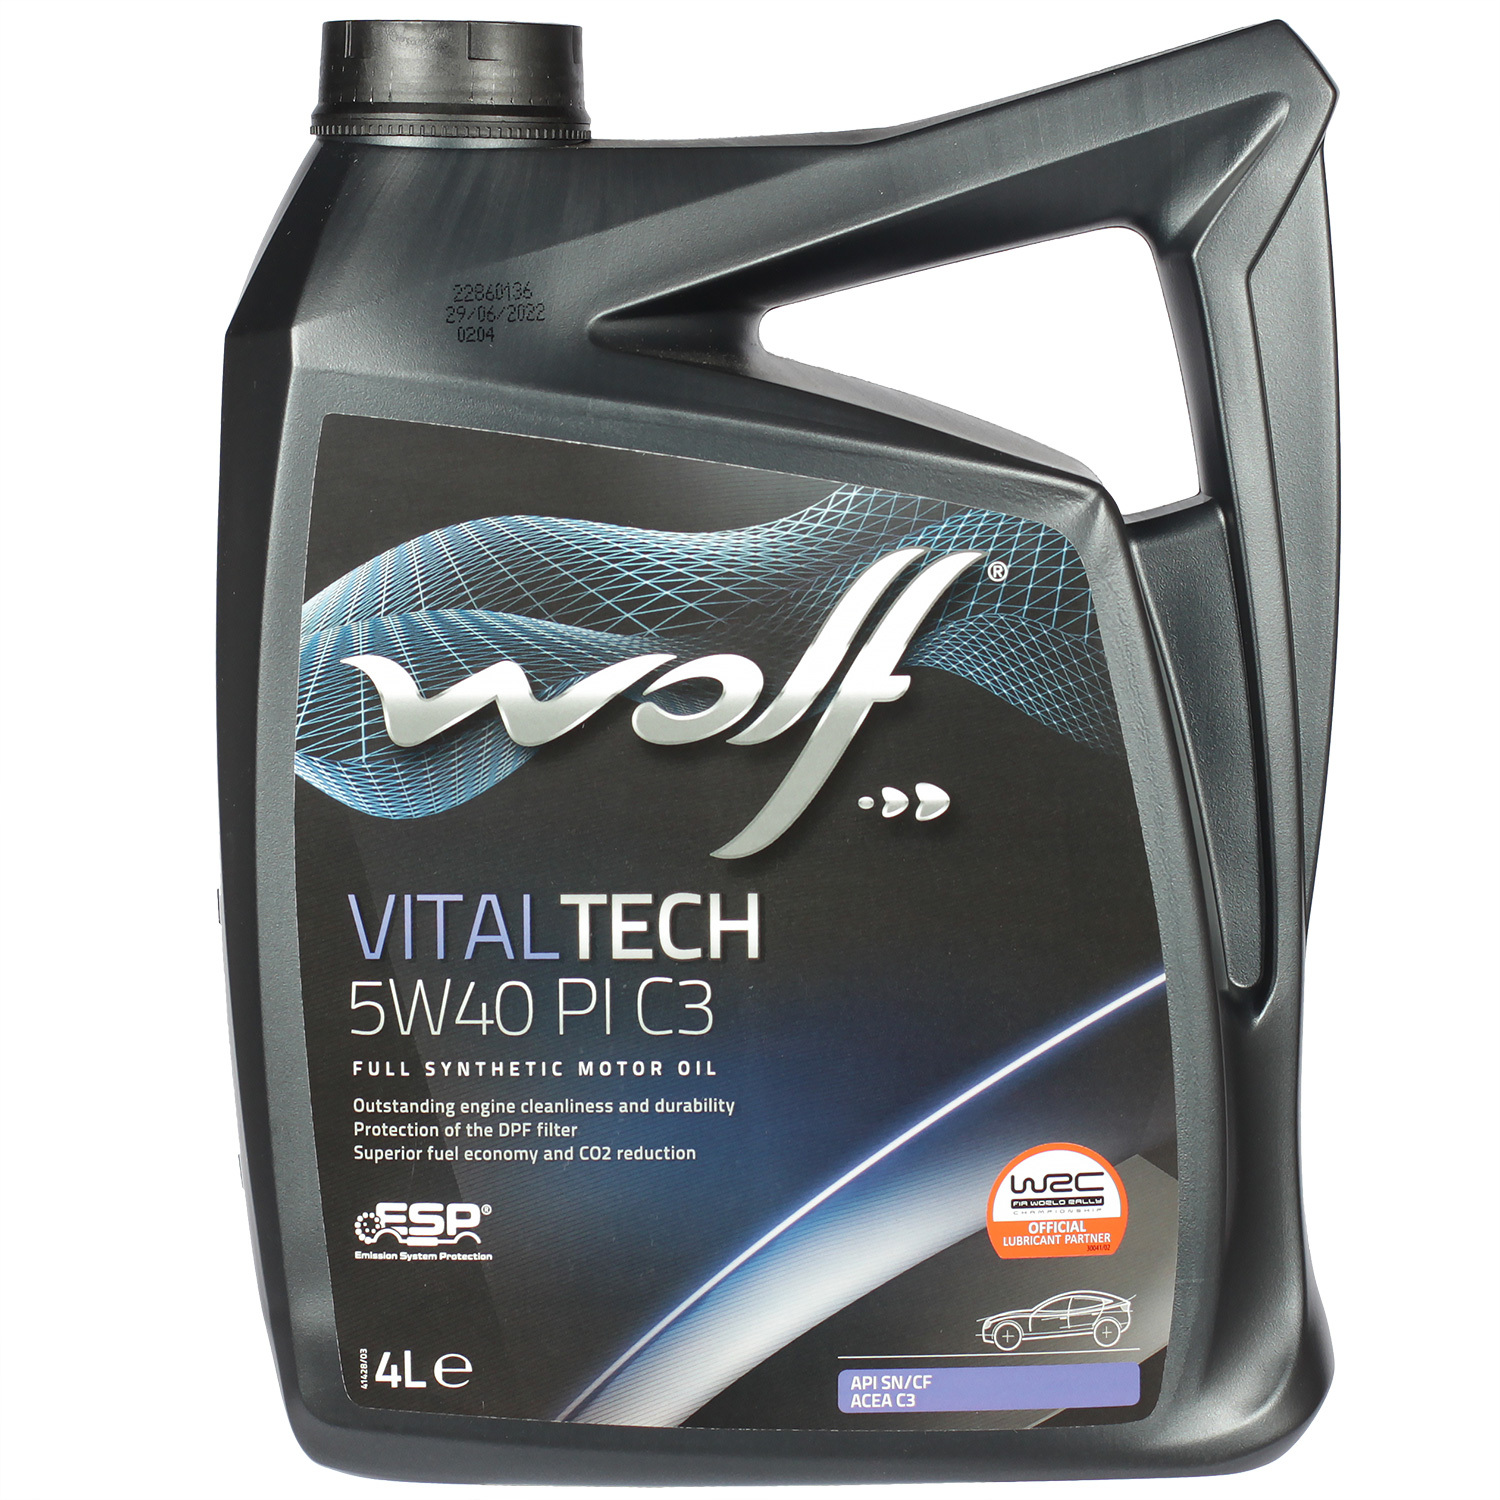 WOLF Масло моторное WOLF VITALTECH 5W-40 PI C3 4л wolf масло моторное wolf officialtech ms f 5w 30 1л